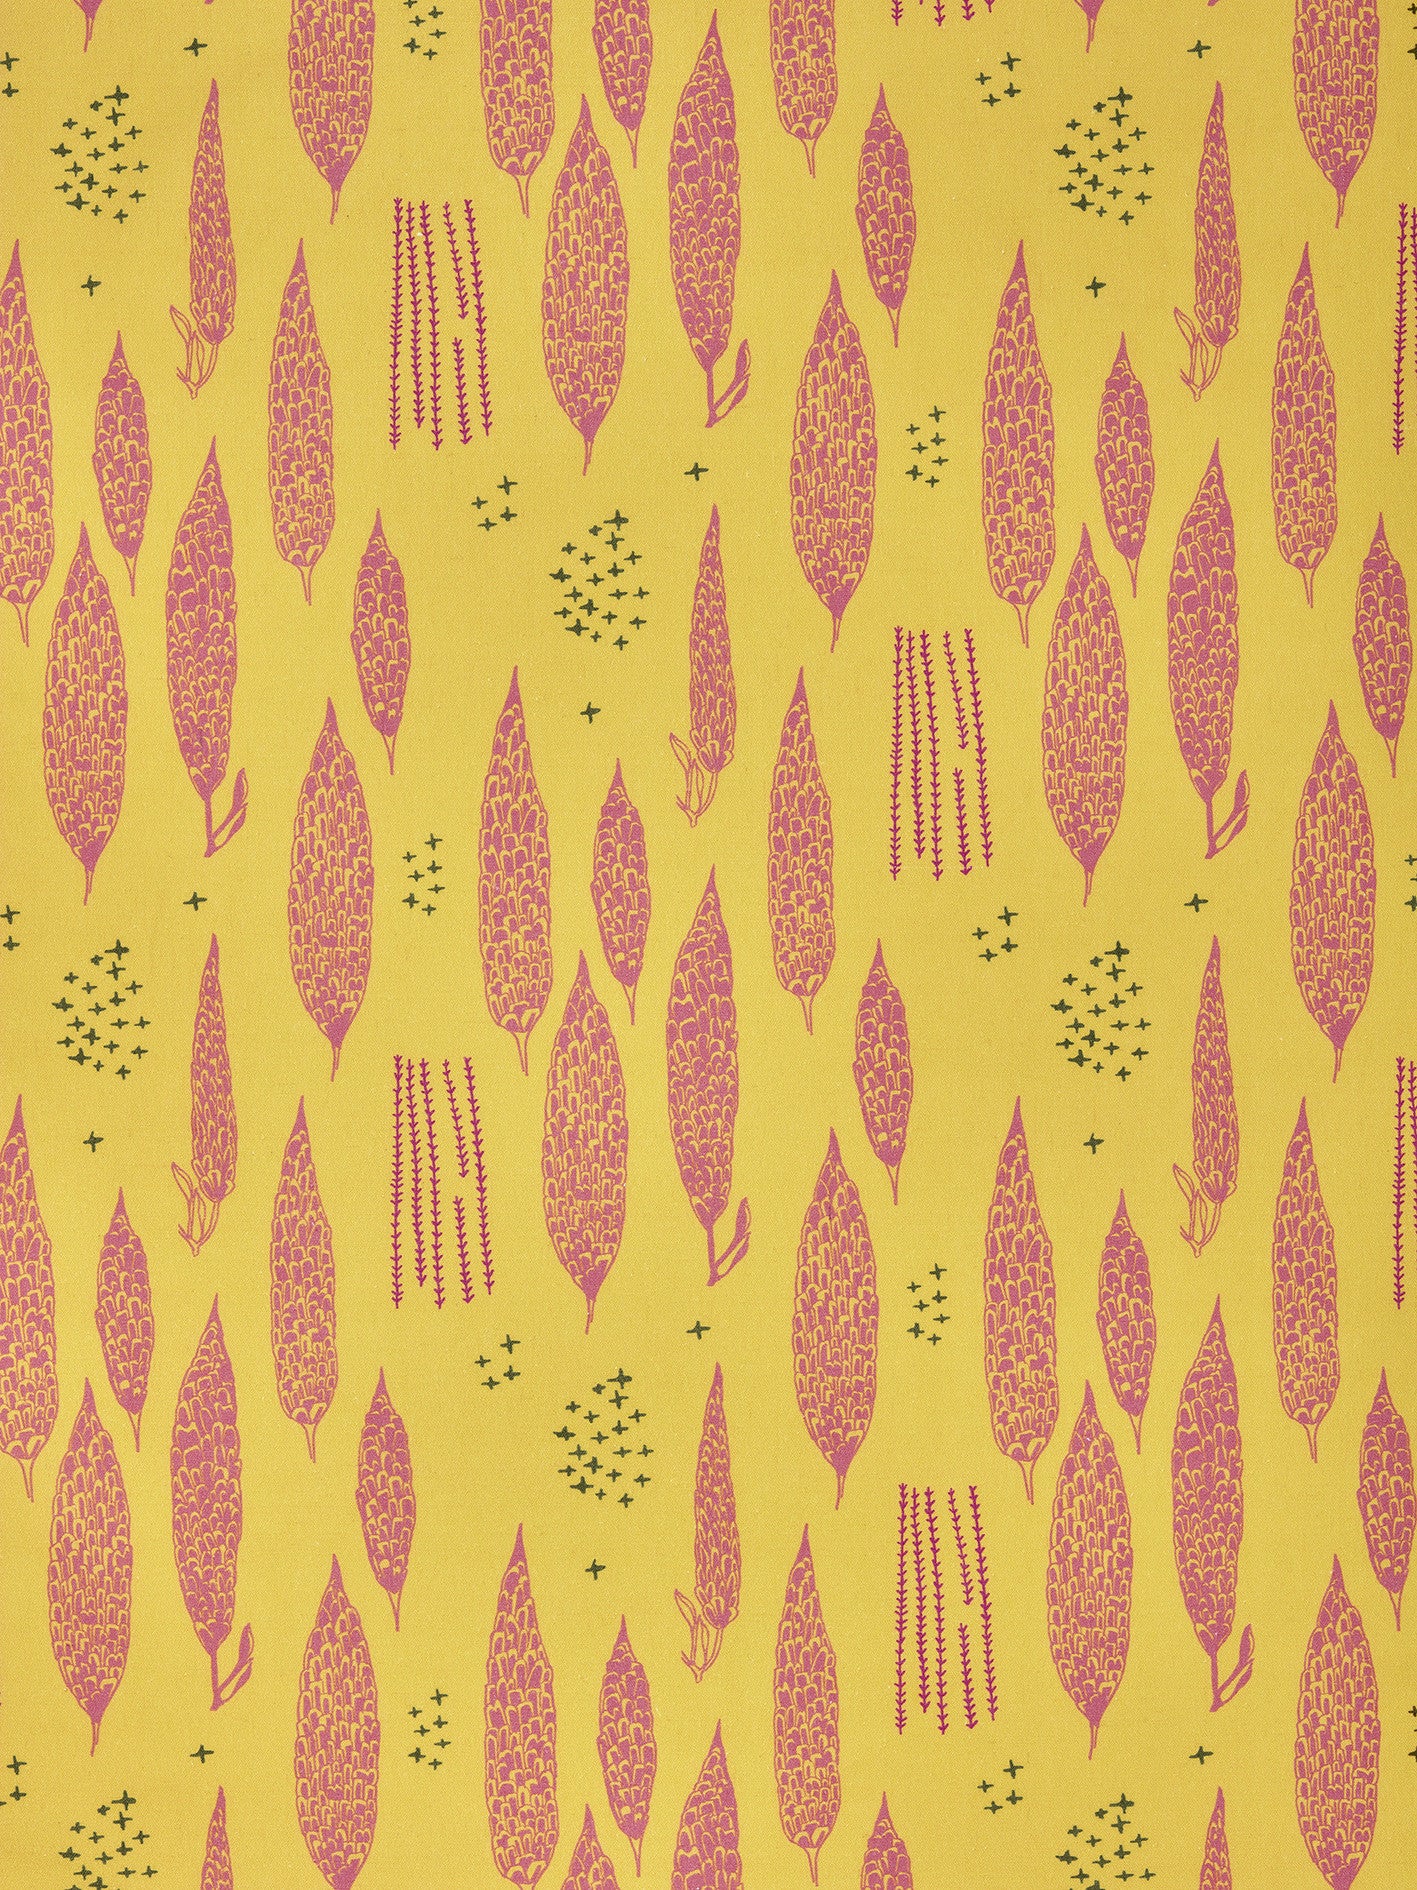 Graphic Rosemary Sprig Pattern Printed Linen Cotton Canvas Home Decor Fabric by the meter or yard for curtains, blinds or upholstery in Bright Mustard Yellow and Coral Pink ships from Canada (USA)